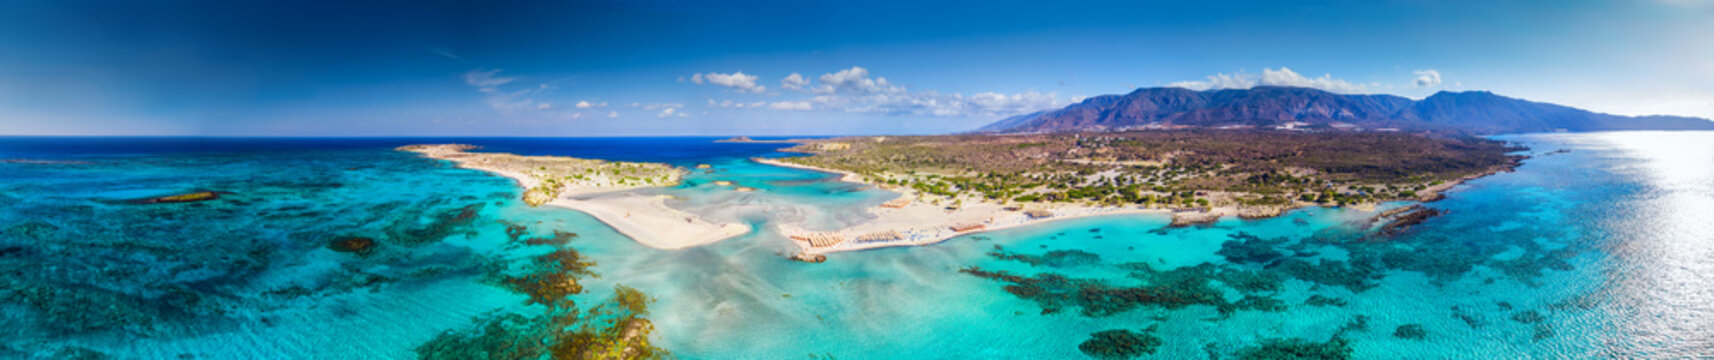 Fototapeta Aerial view of Elafonissi beach on Crete island with azure clear water, Greece, Europeof Elafonissi beach on Crete island with azure clear water, Greece, Europe